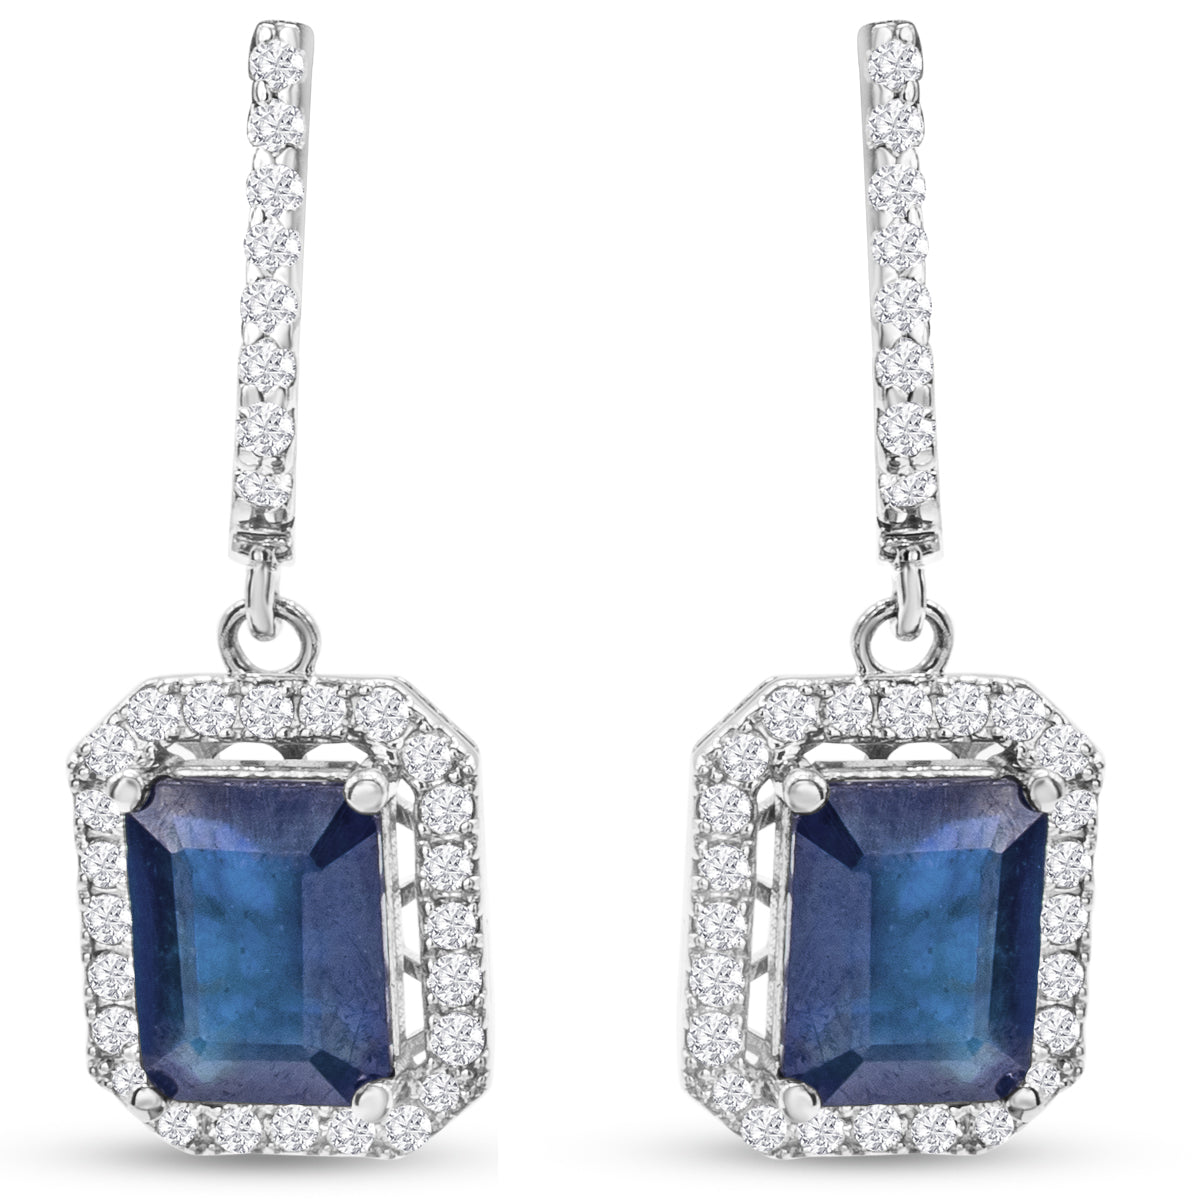 Sselects 4 1/2 Carat Sapphire And Diamond Drop Earrings In 14 Karat White I-j, I1-i2 In Gold